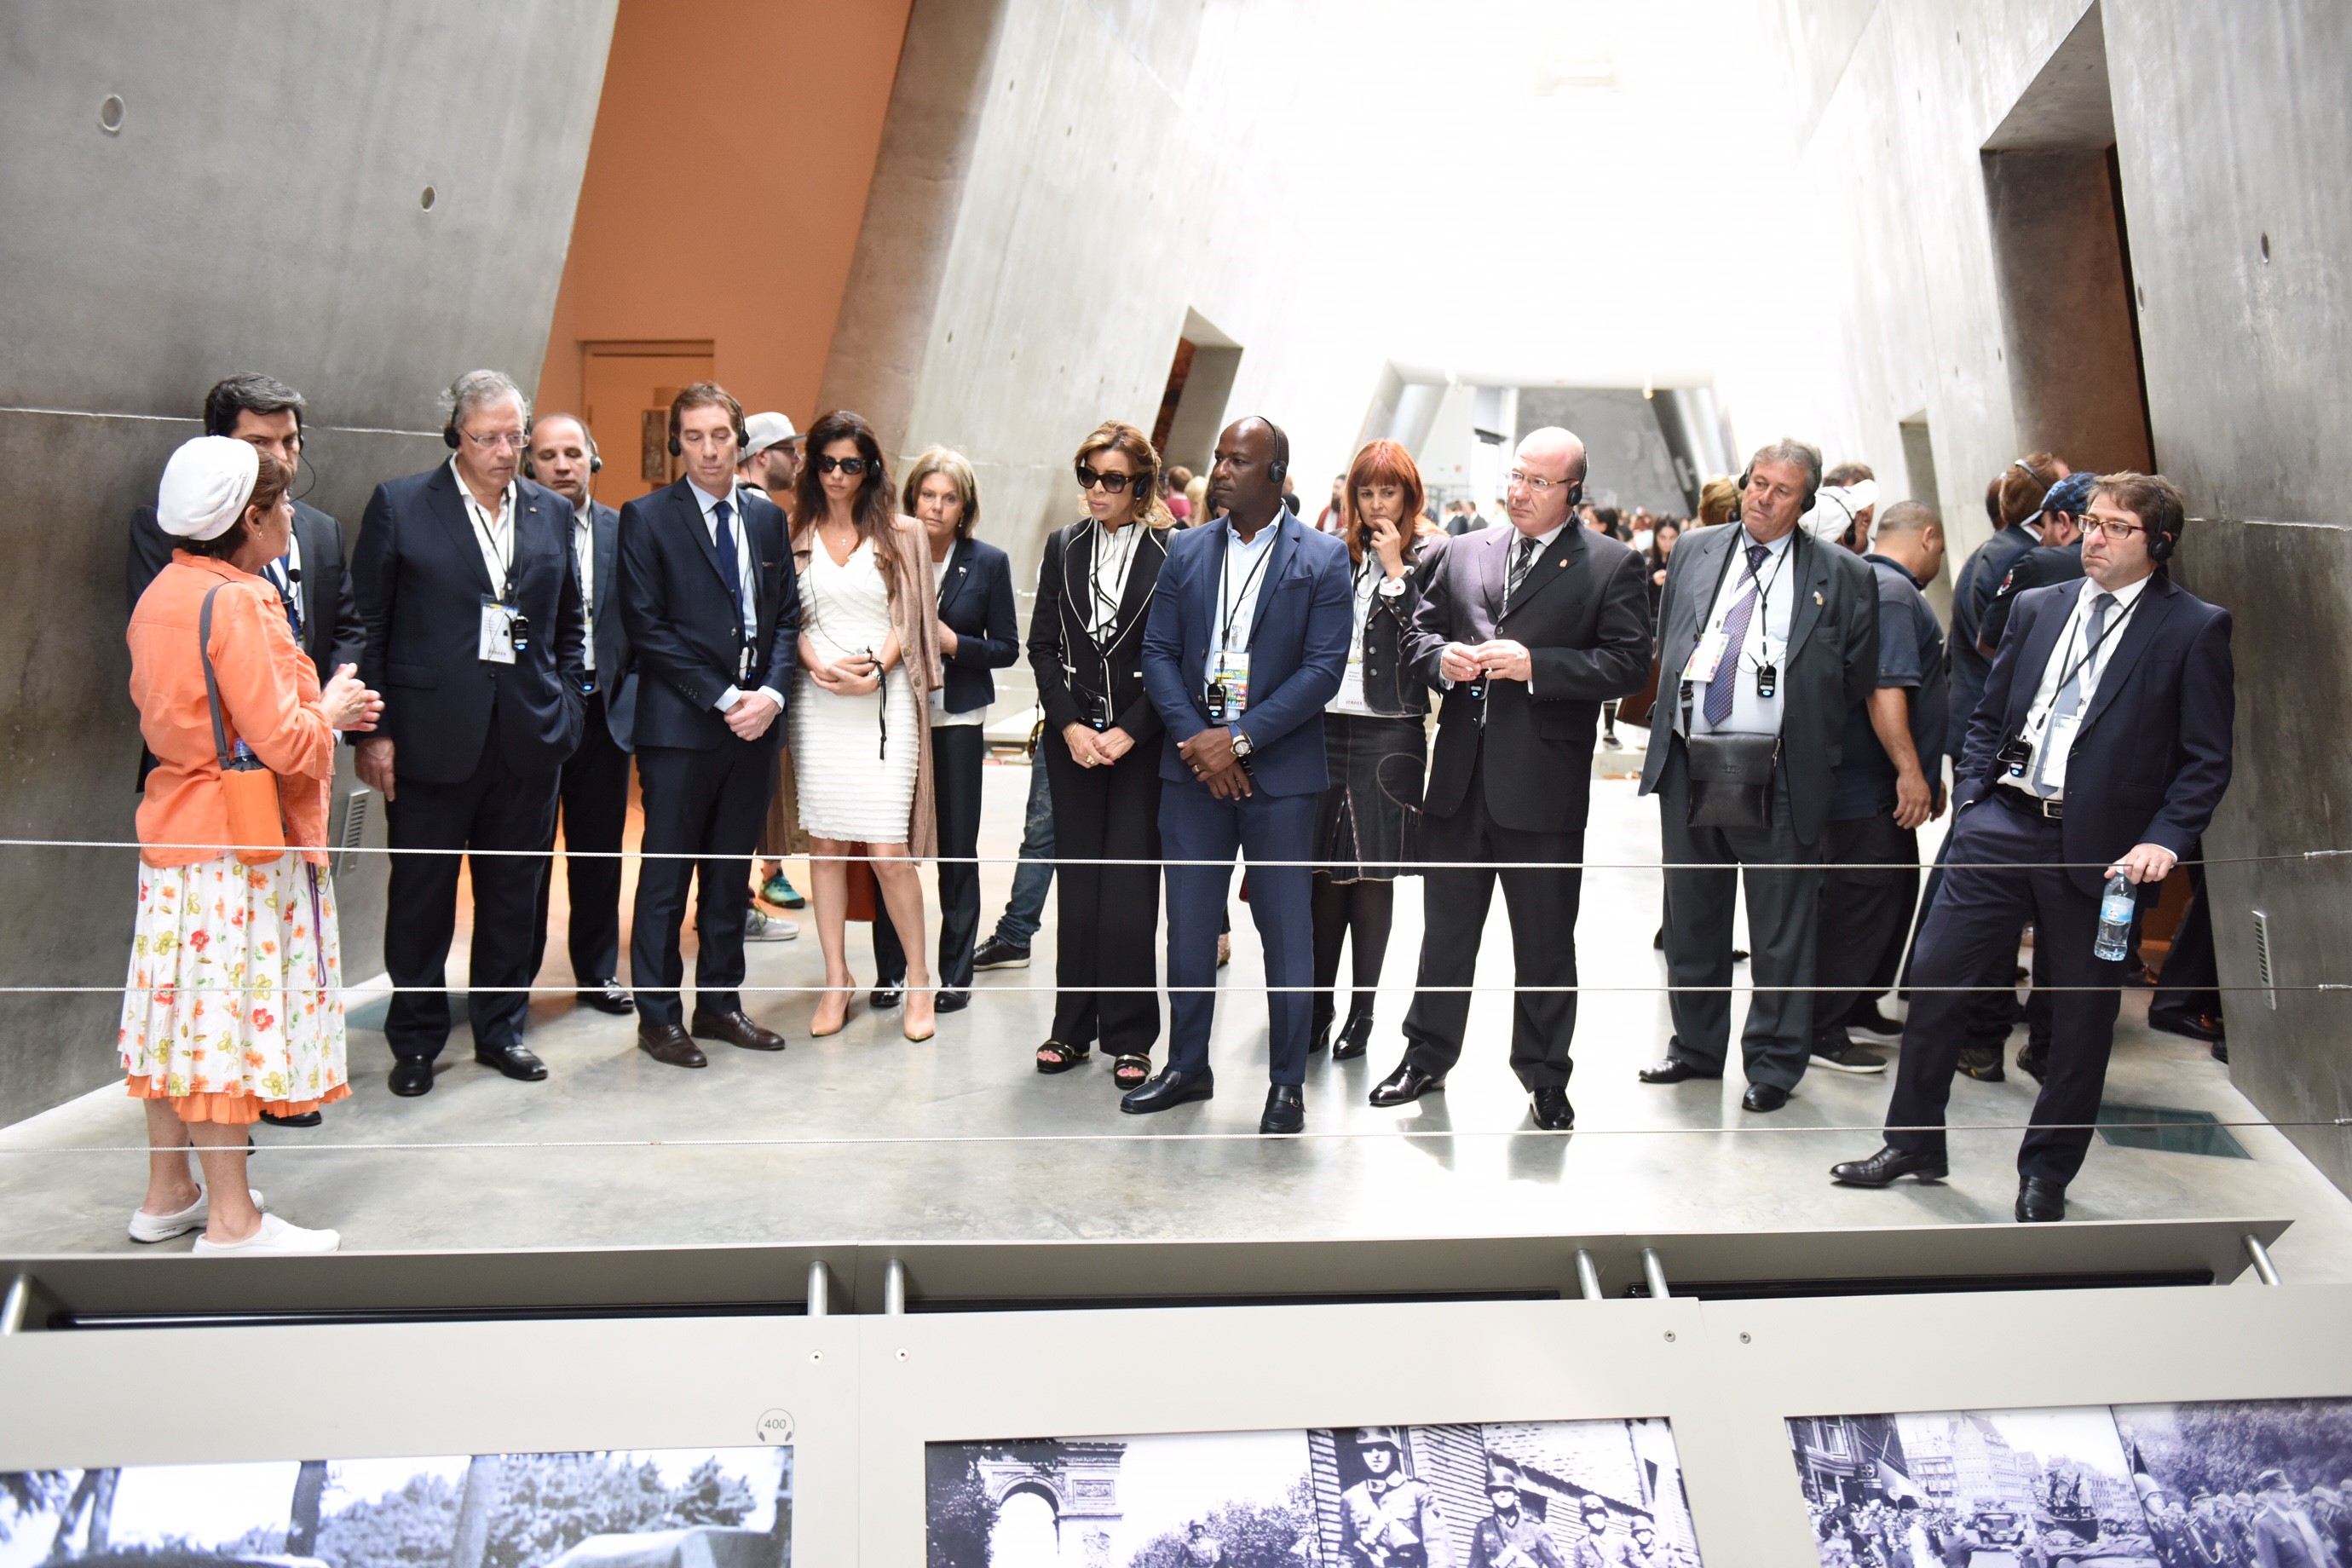 The mayors received a guided tour of the Holocaust History Museum